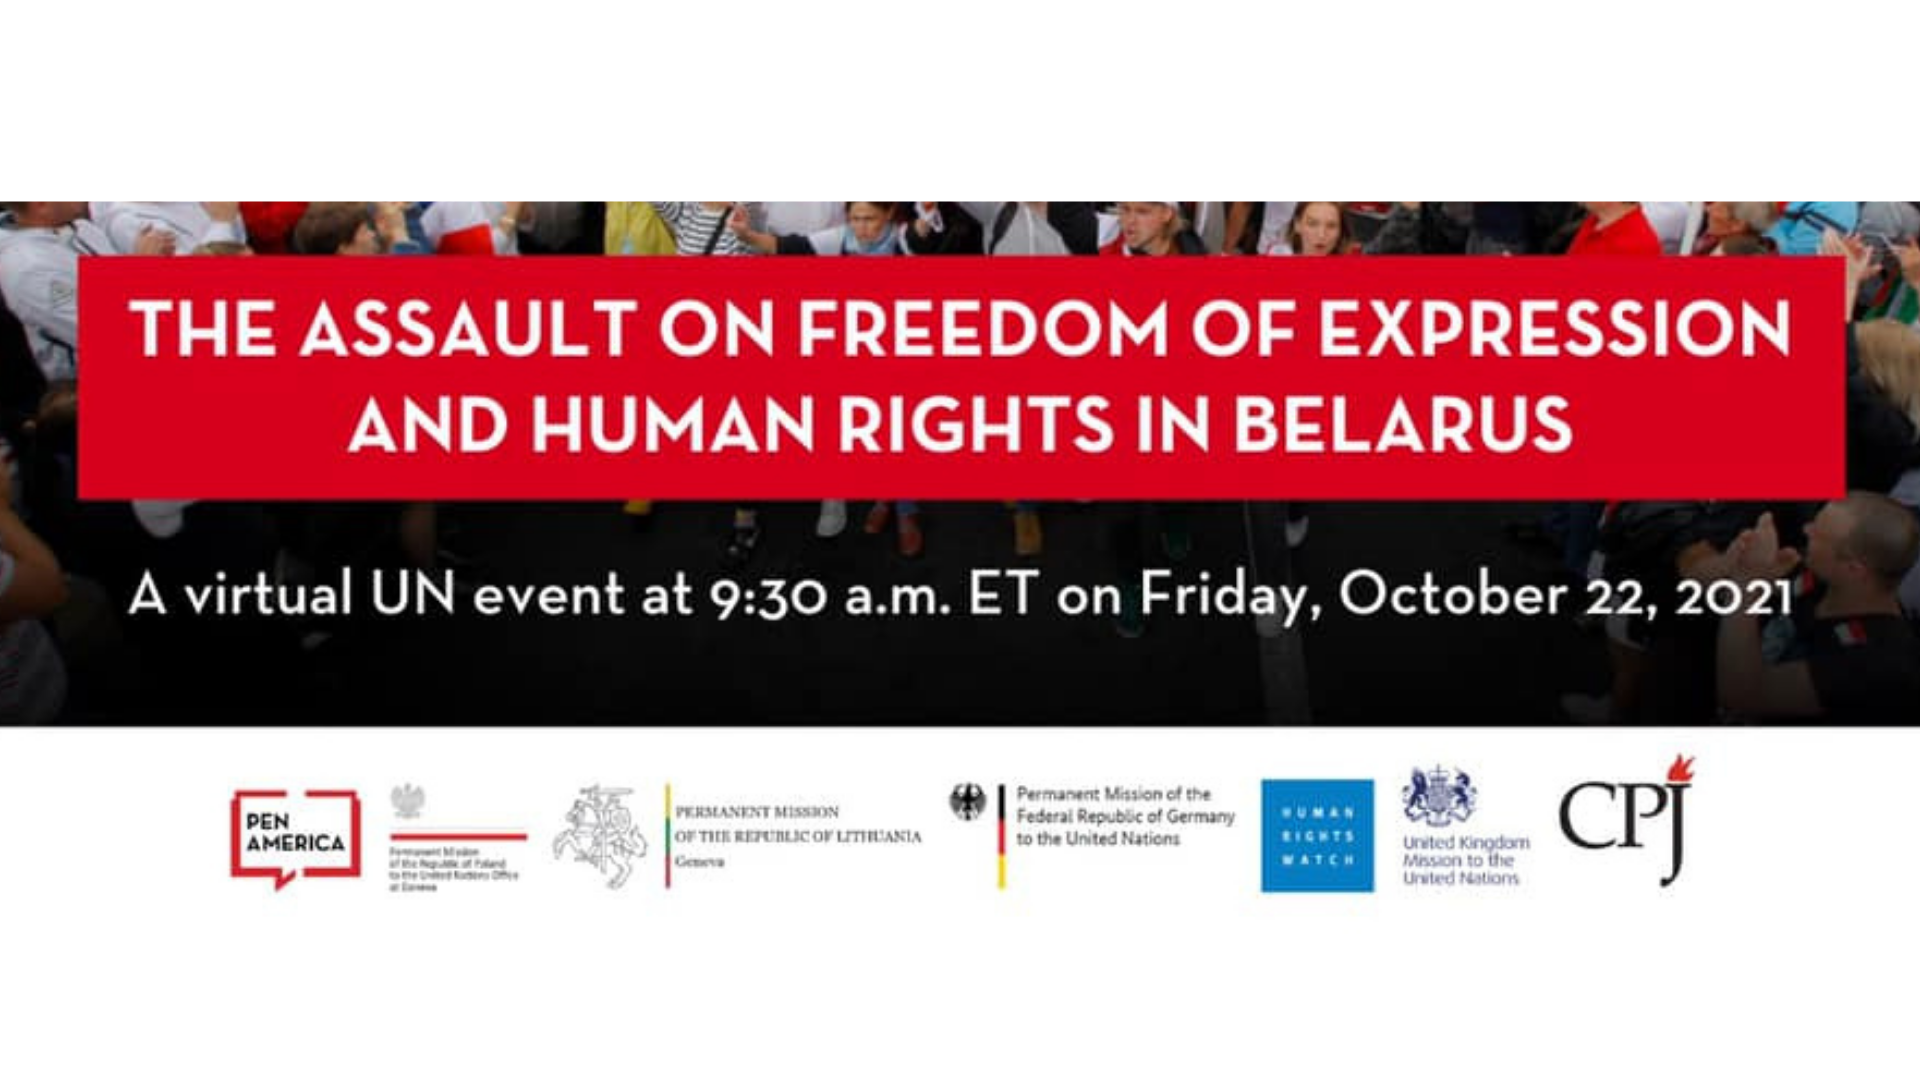 Virtual UN Event on the Assault on Freedom of Expression and Human Rights in Belarus